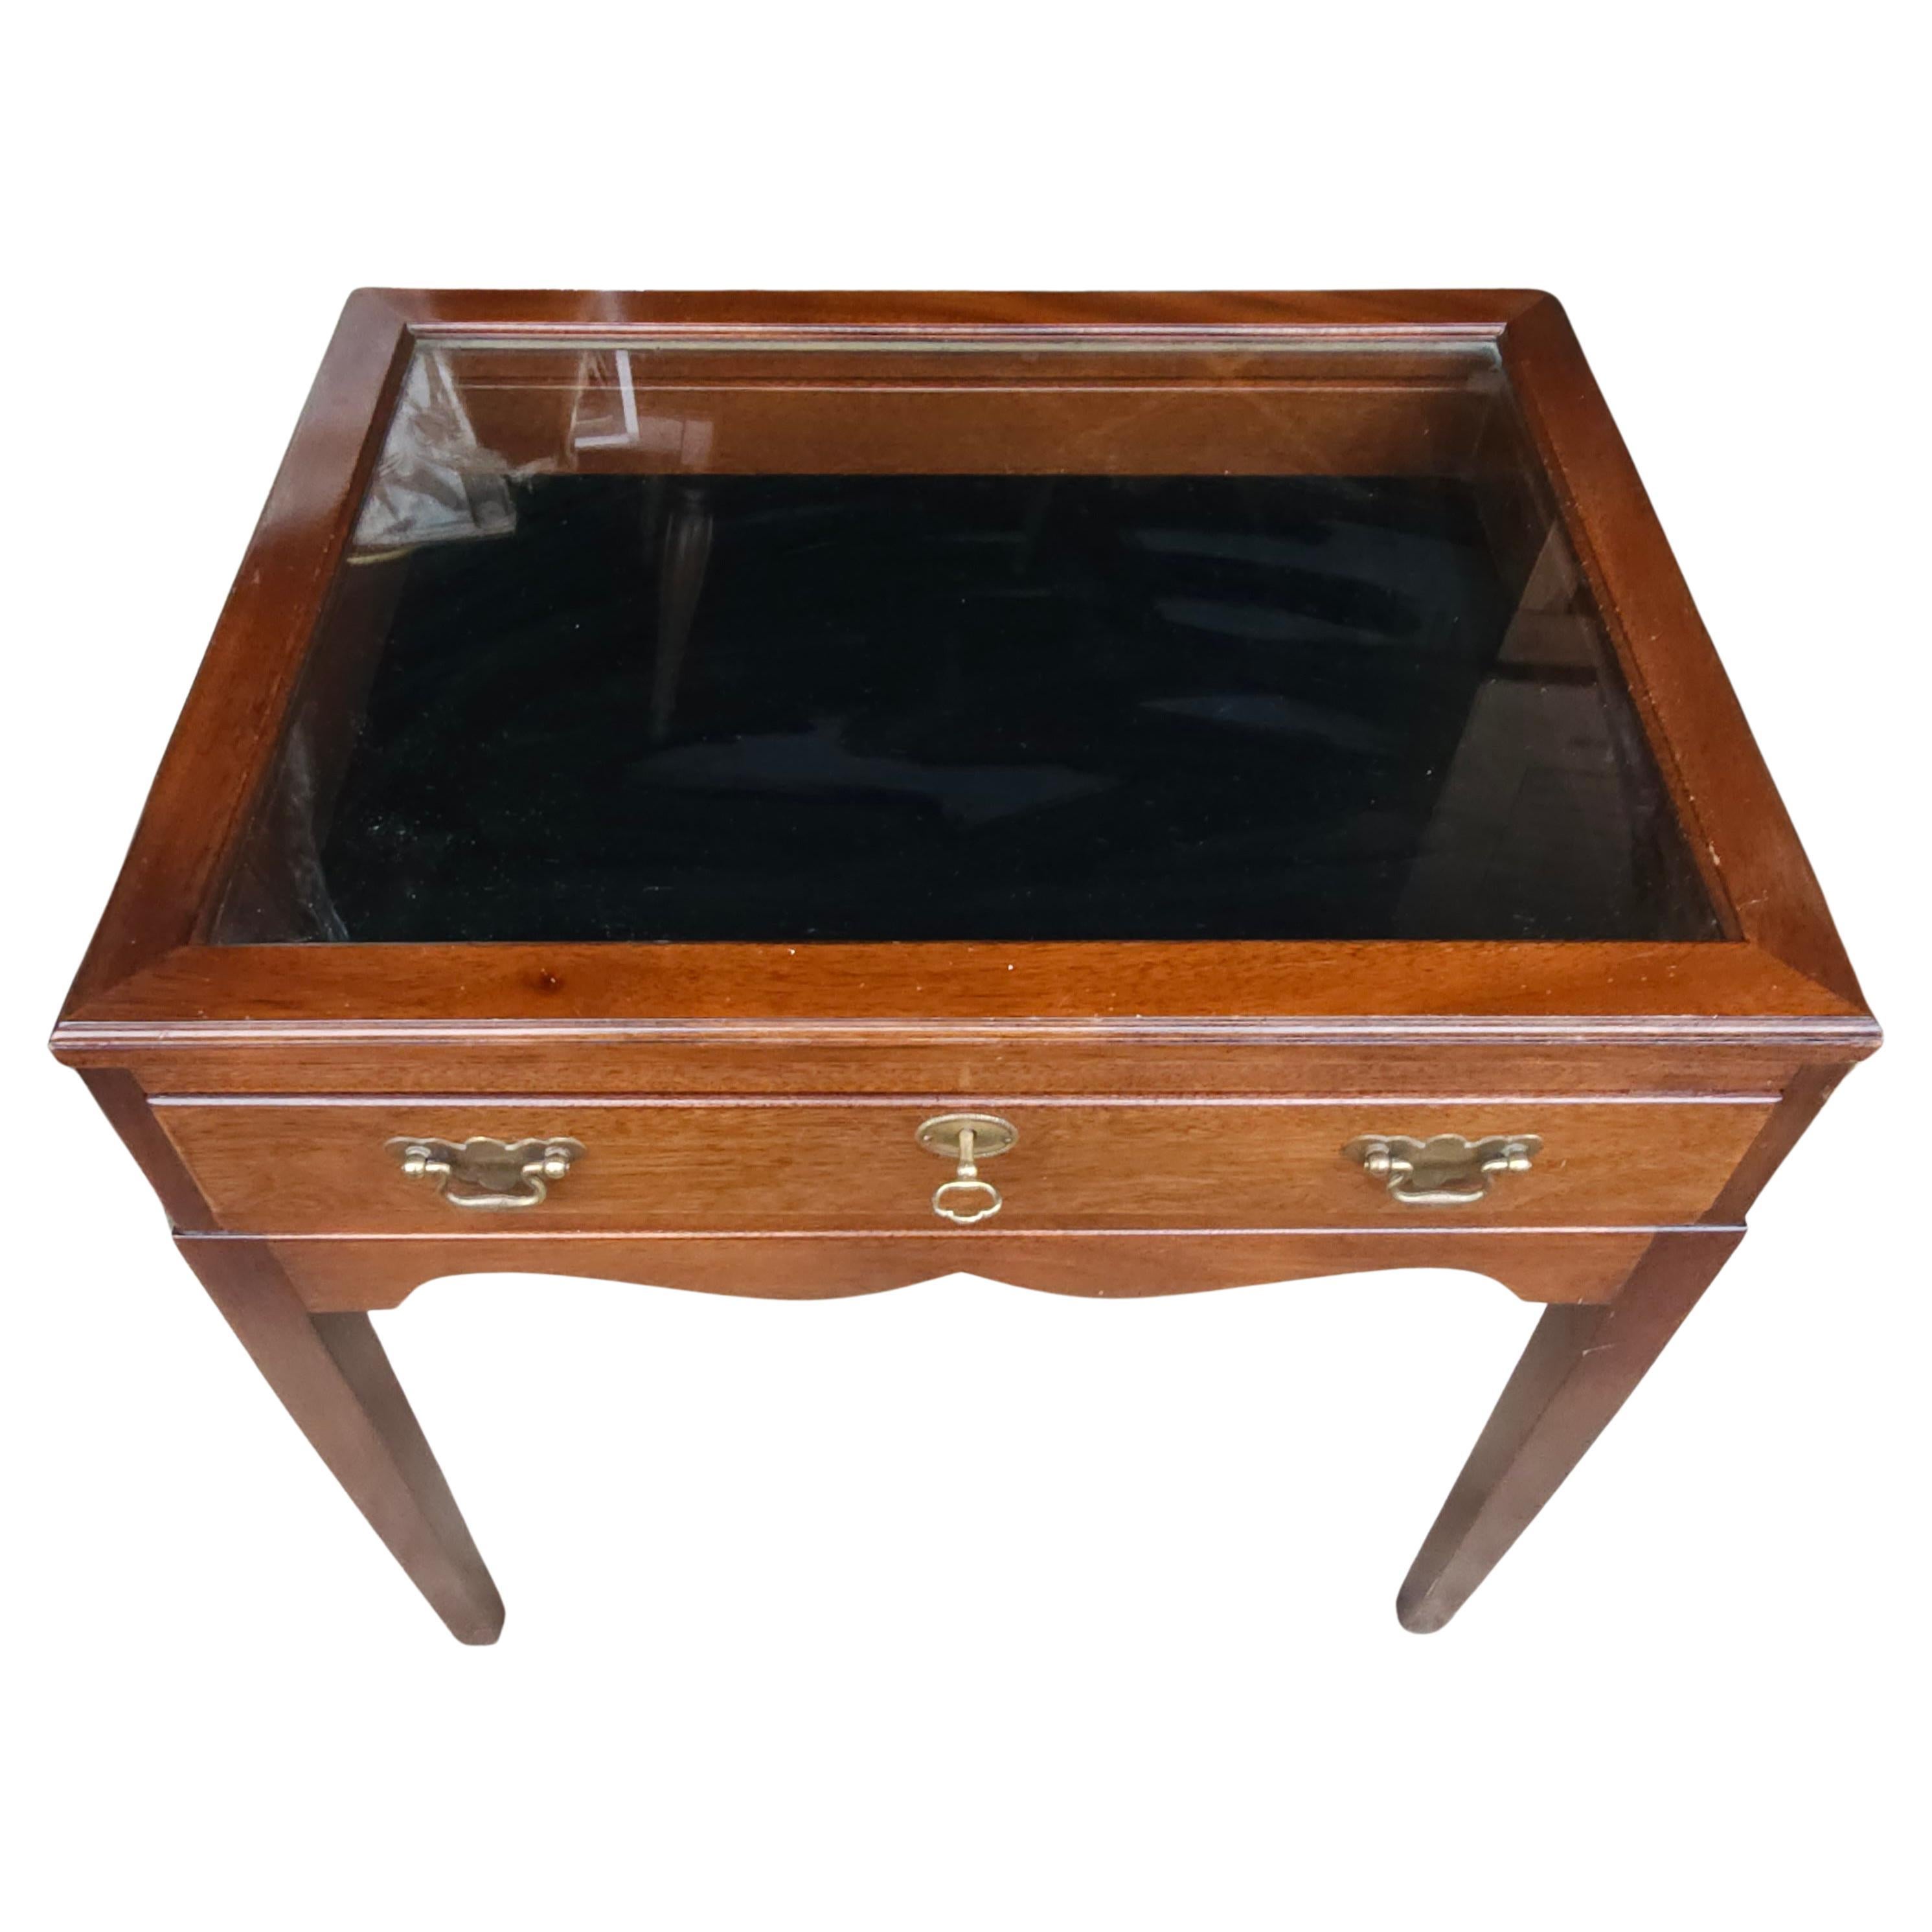 Modern 20th Century Mahogany and Velvet Lined with Glass Top Lockable Display Table